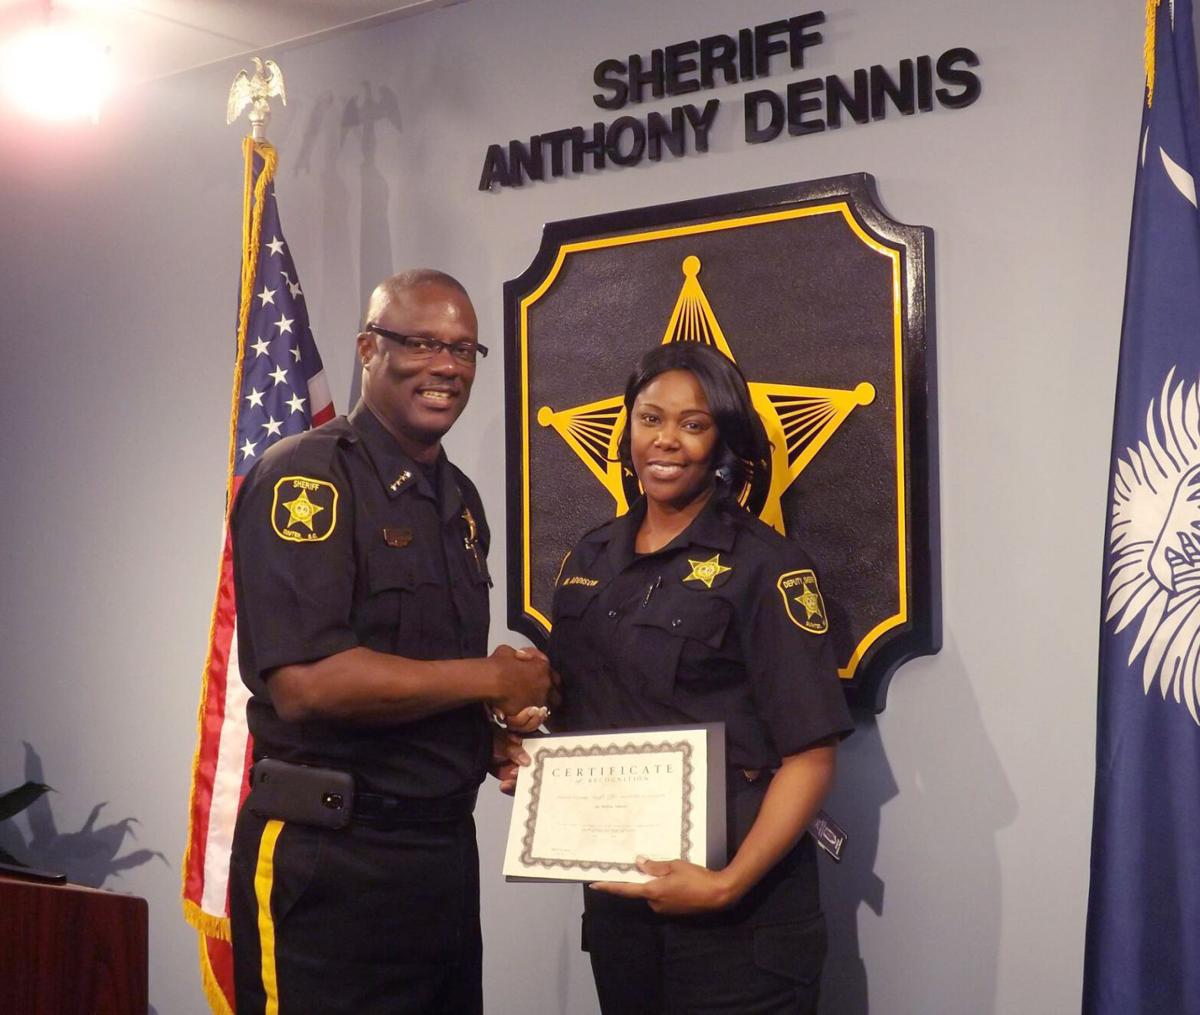 Photo of Sumter County Sheriff Anthony Dennis awarding certificate to former Lt. Melissa Addison